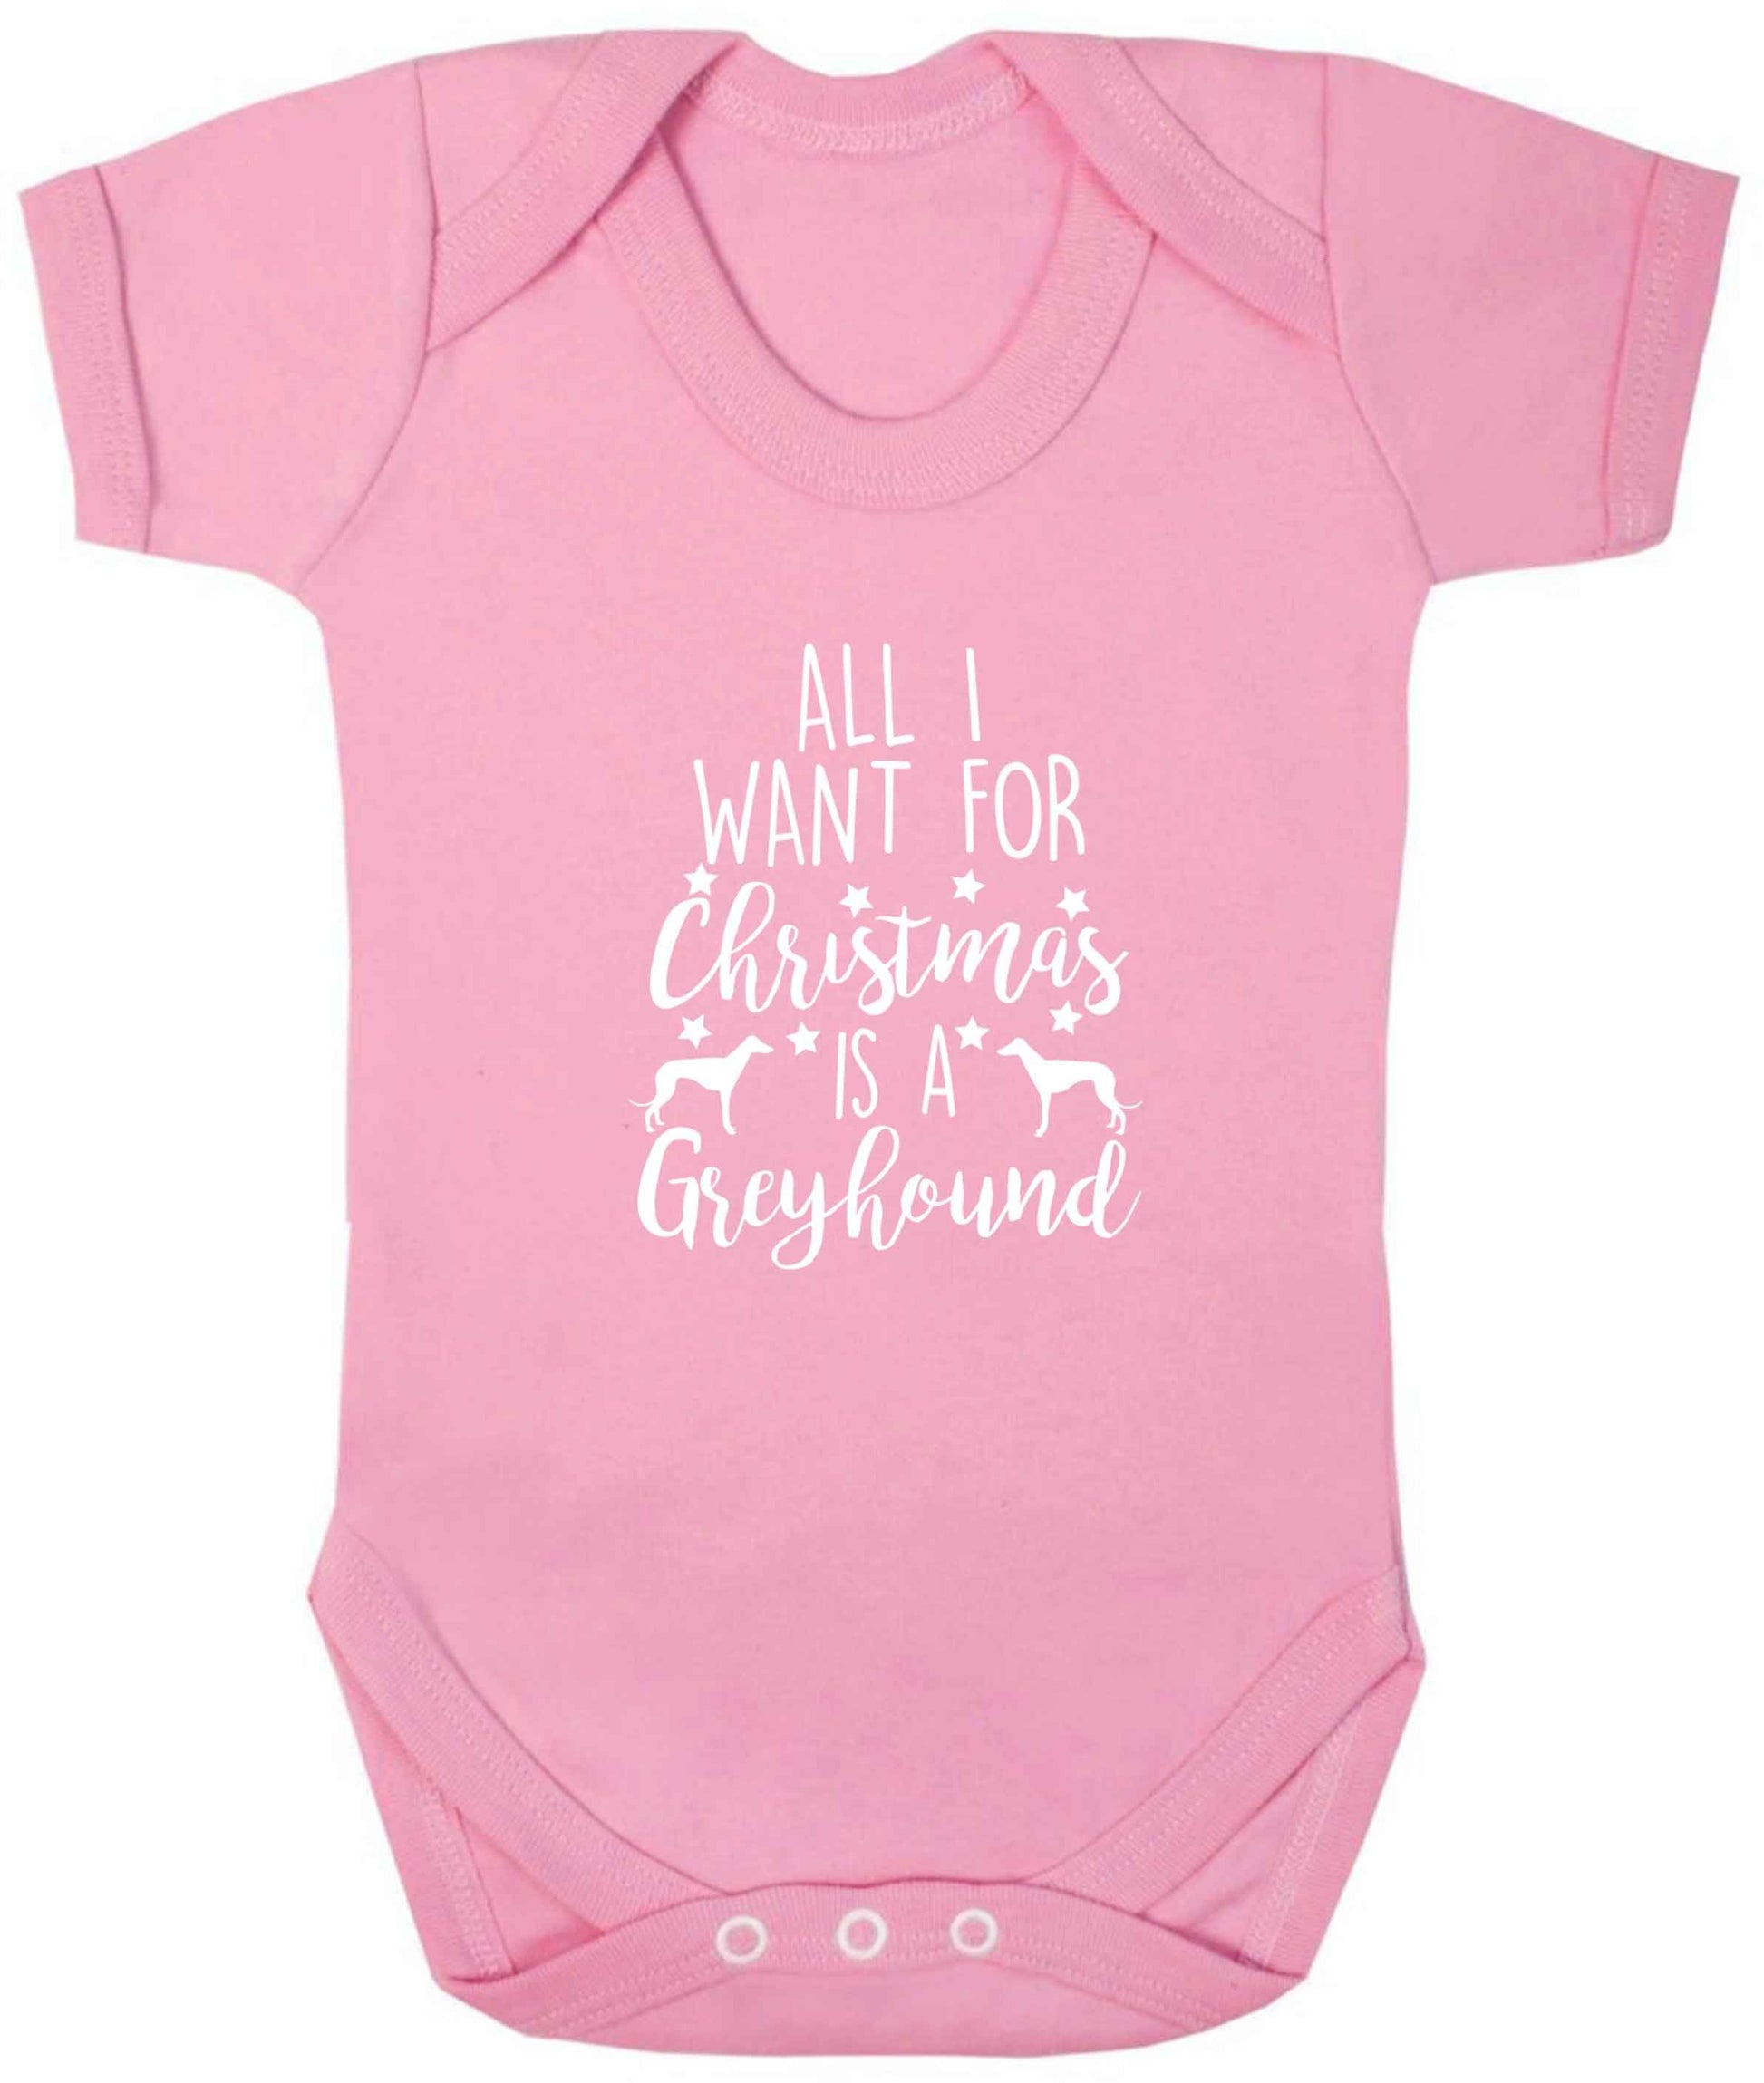 All I want for Christmas is a greyhound baby vest pale pink 18-24 months